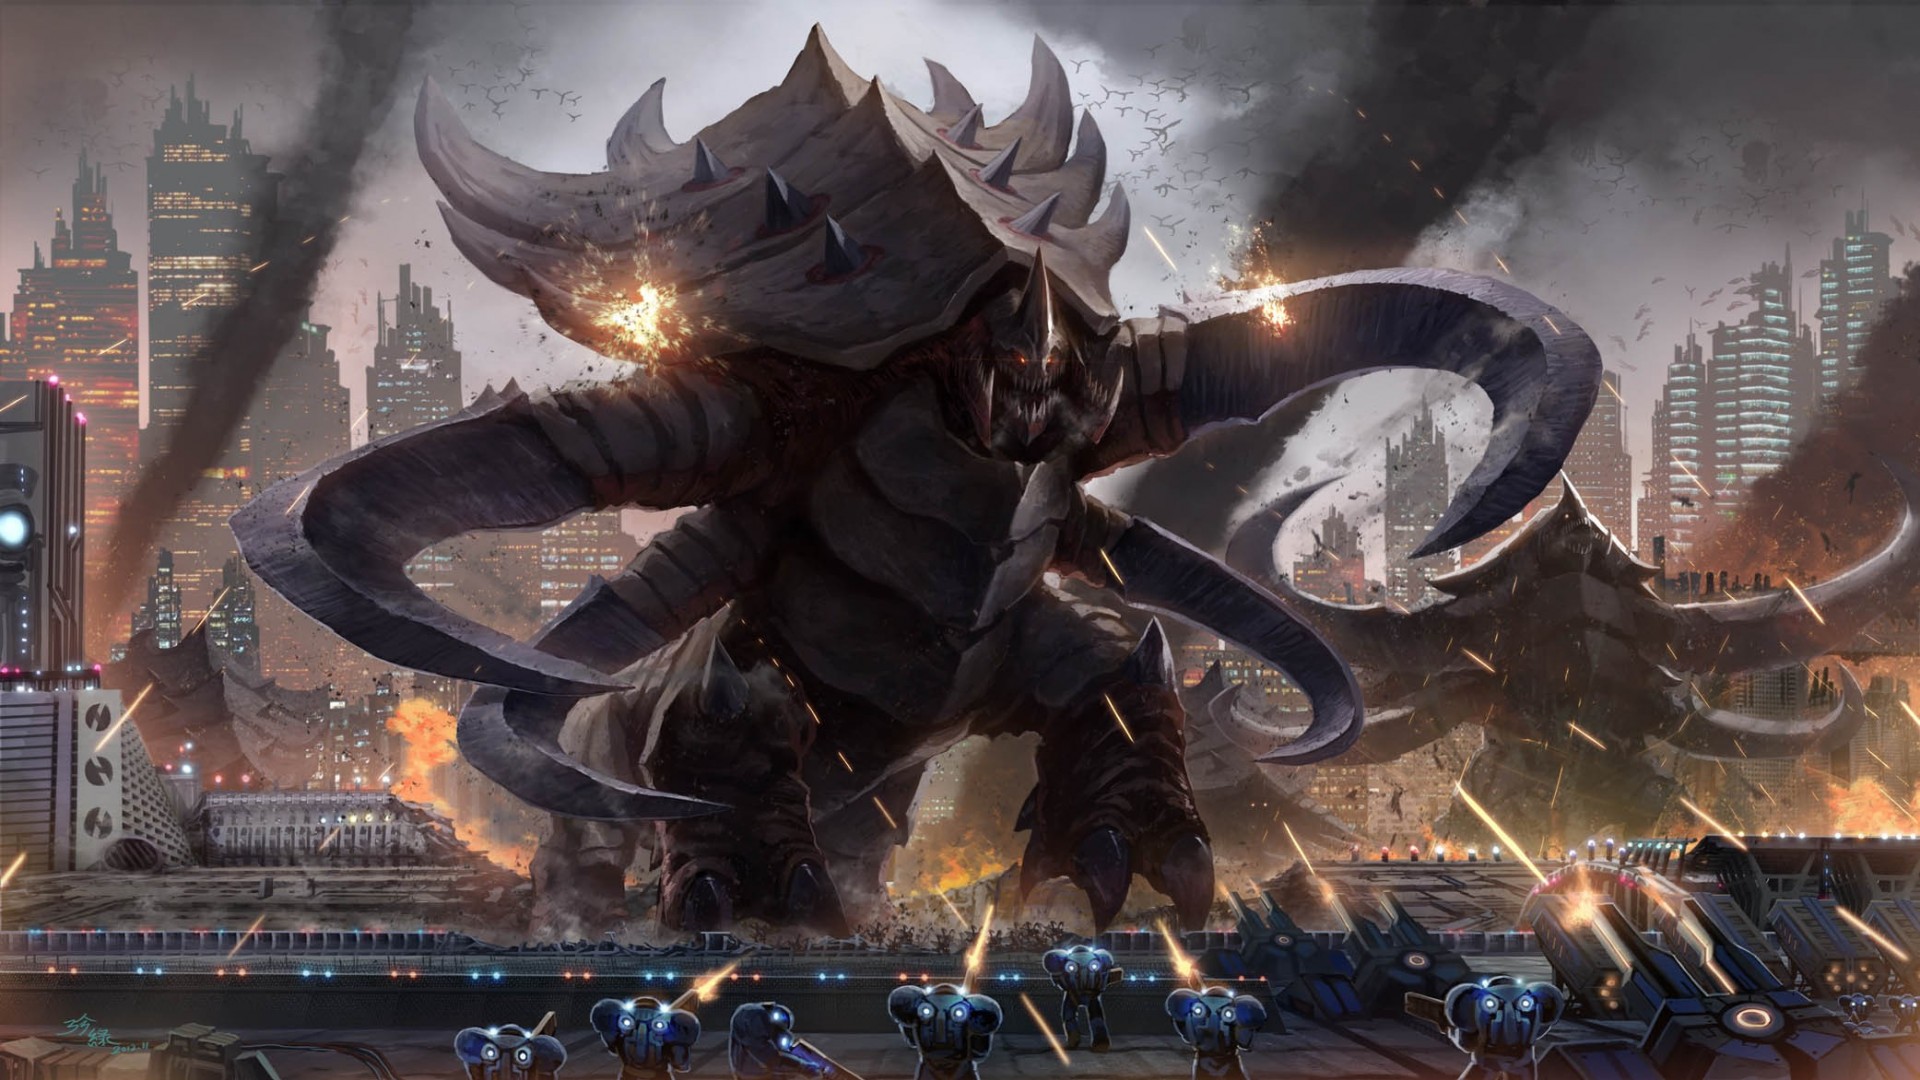 zerg wallpaper,action adventure game,demon,fictional character,strategy video game,cg artwork